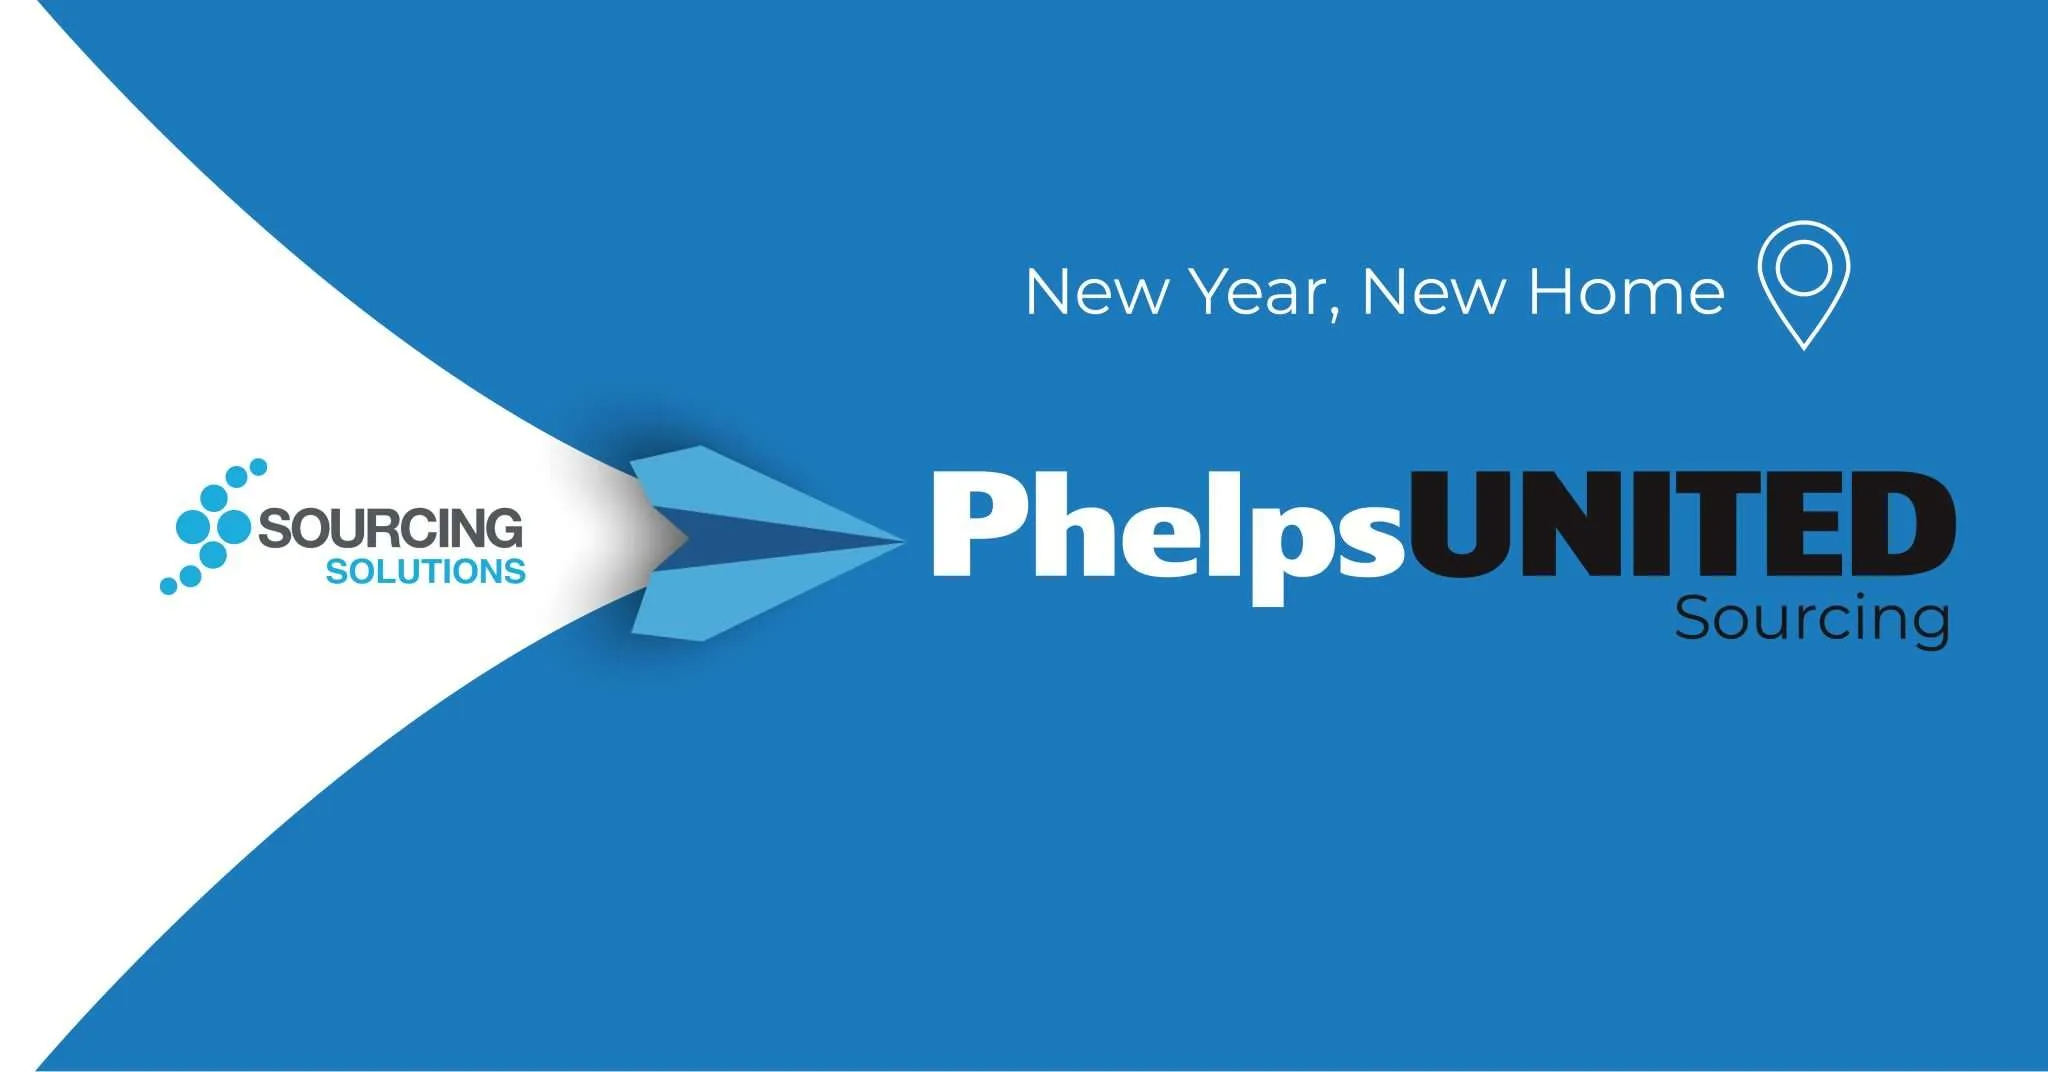 Introducing Phelps United Sourcing, a New Identity for Sourcing Solutions Workplaces.